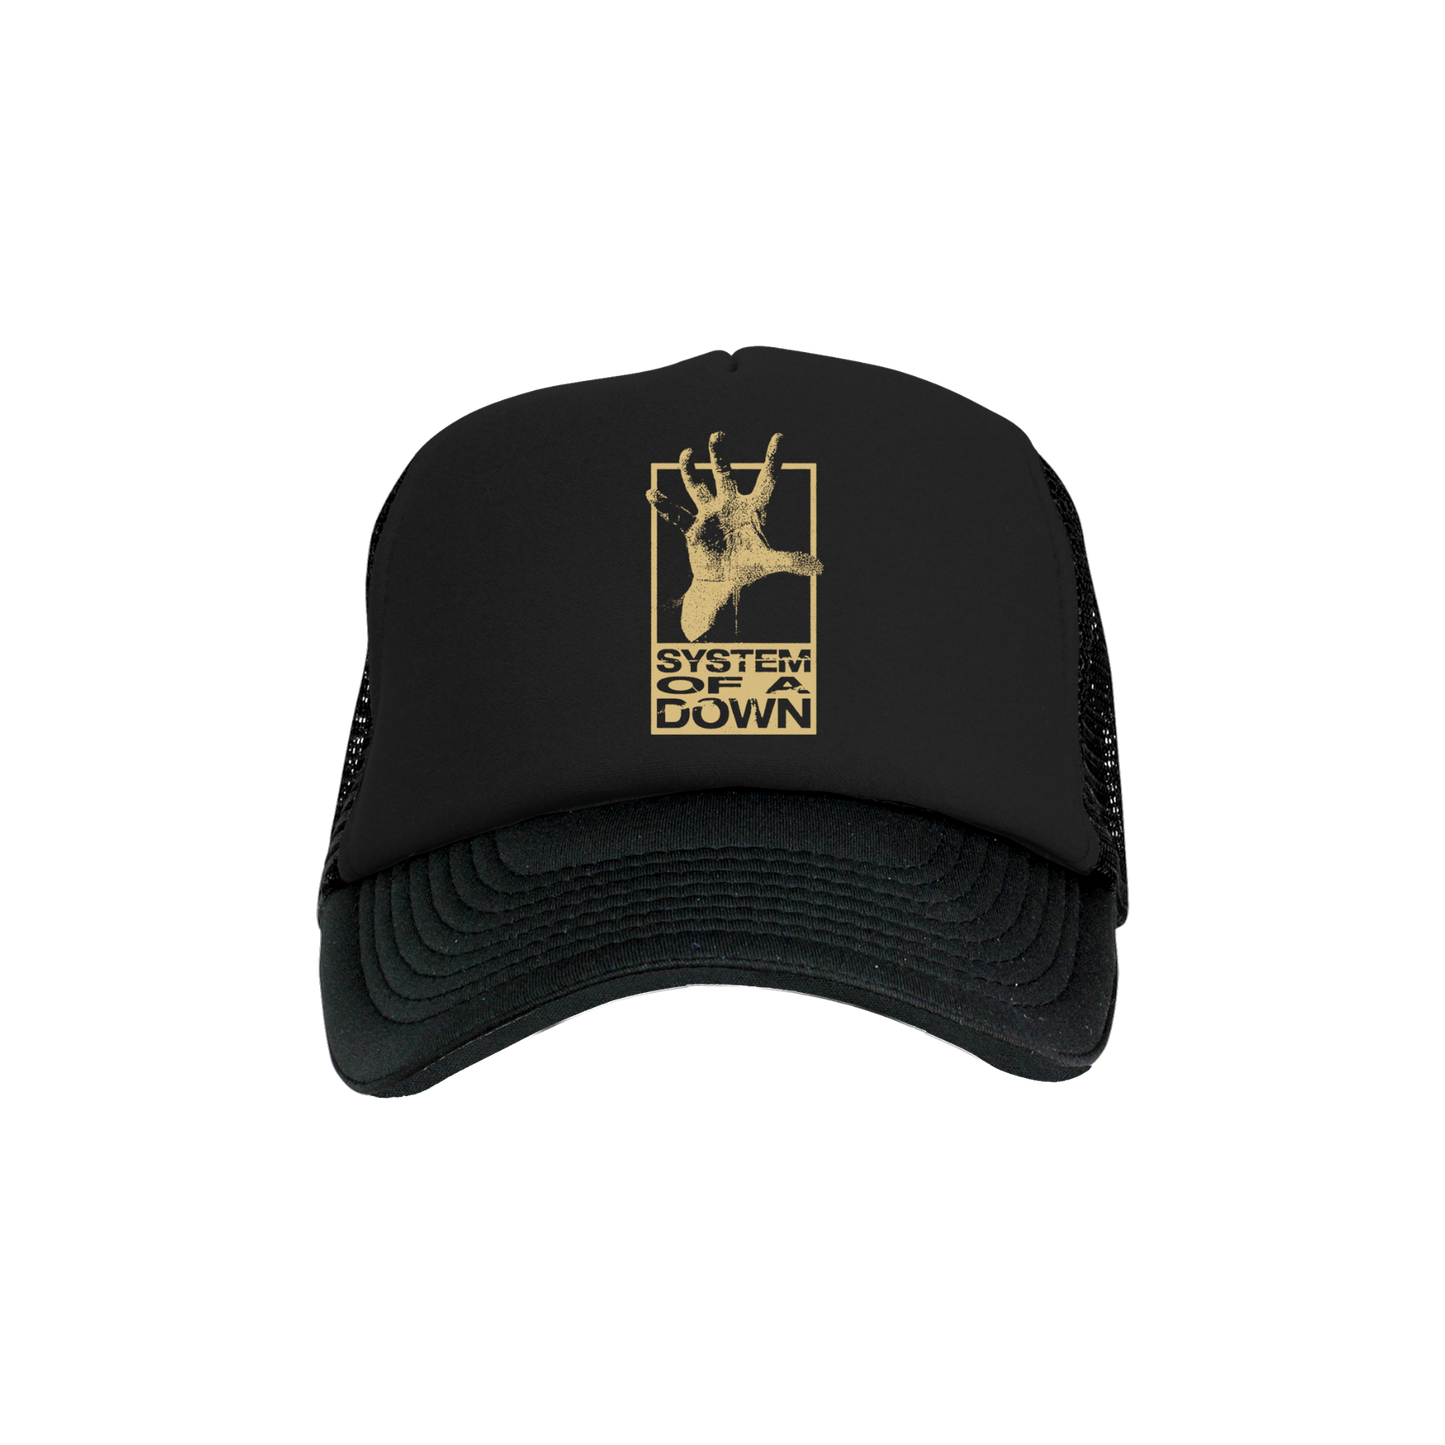 Self-Titled Outside The Box Trucker Hat